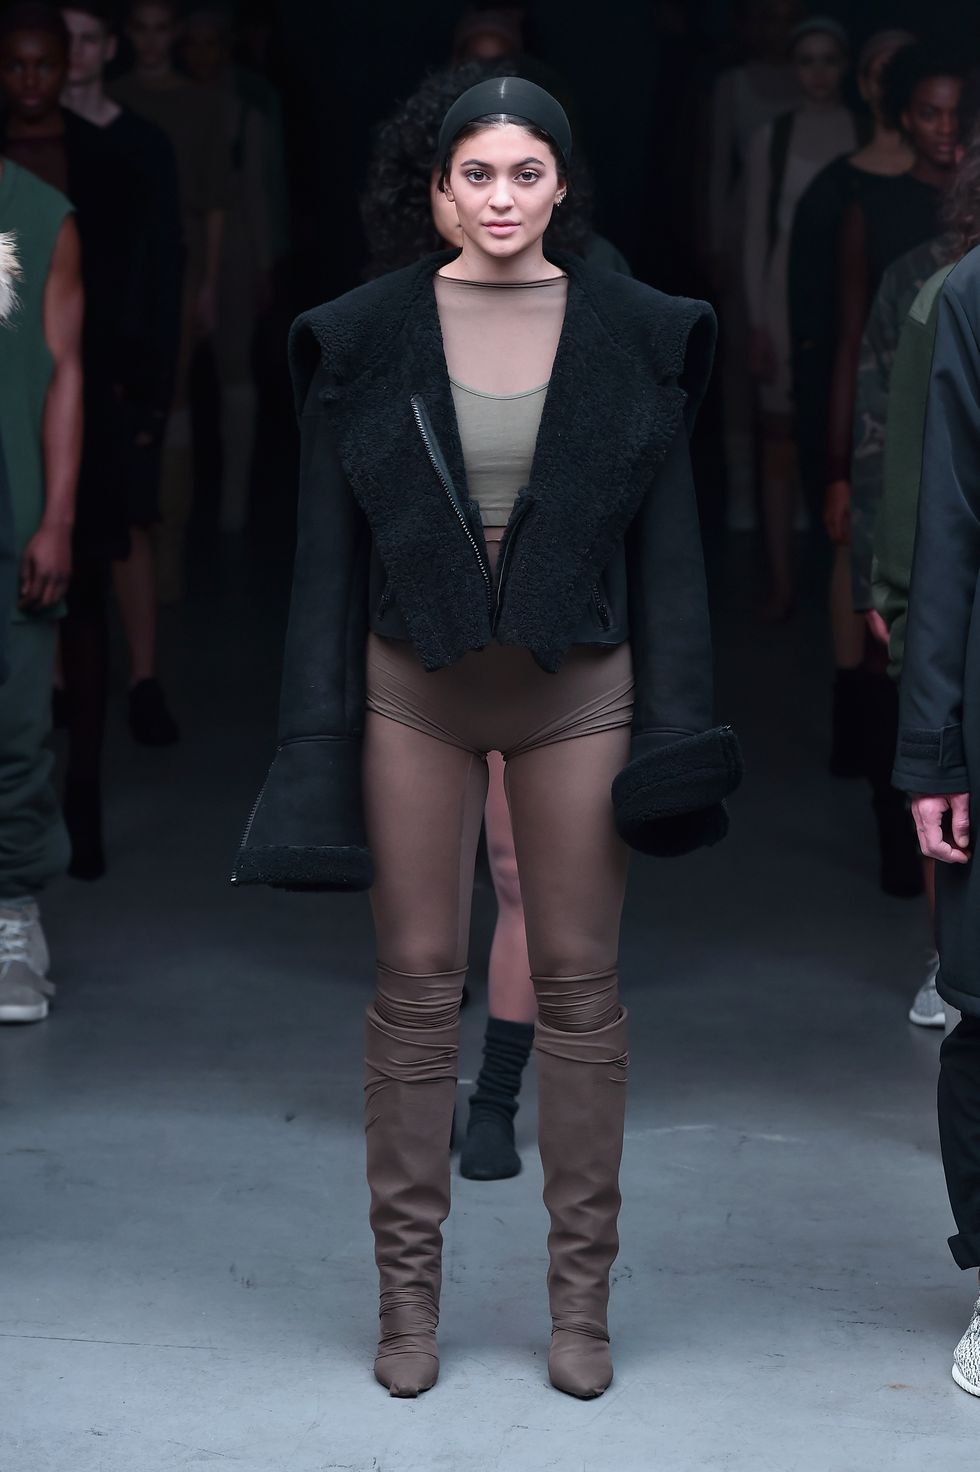 Kylie Jenner was one of the models at Kanye West's adidas show